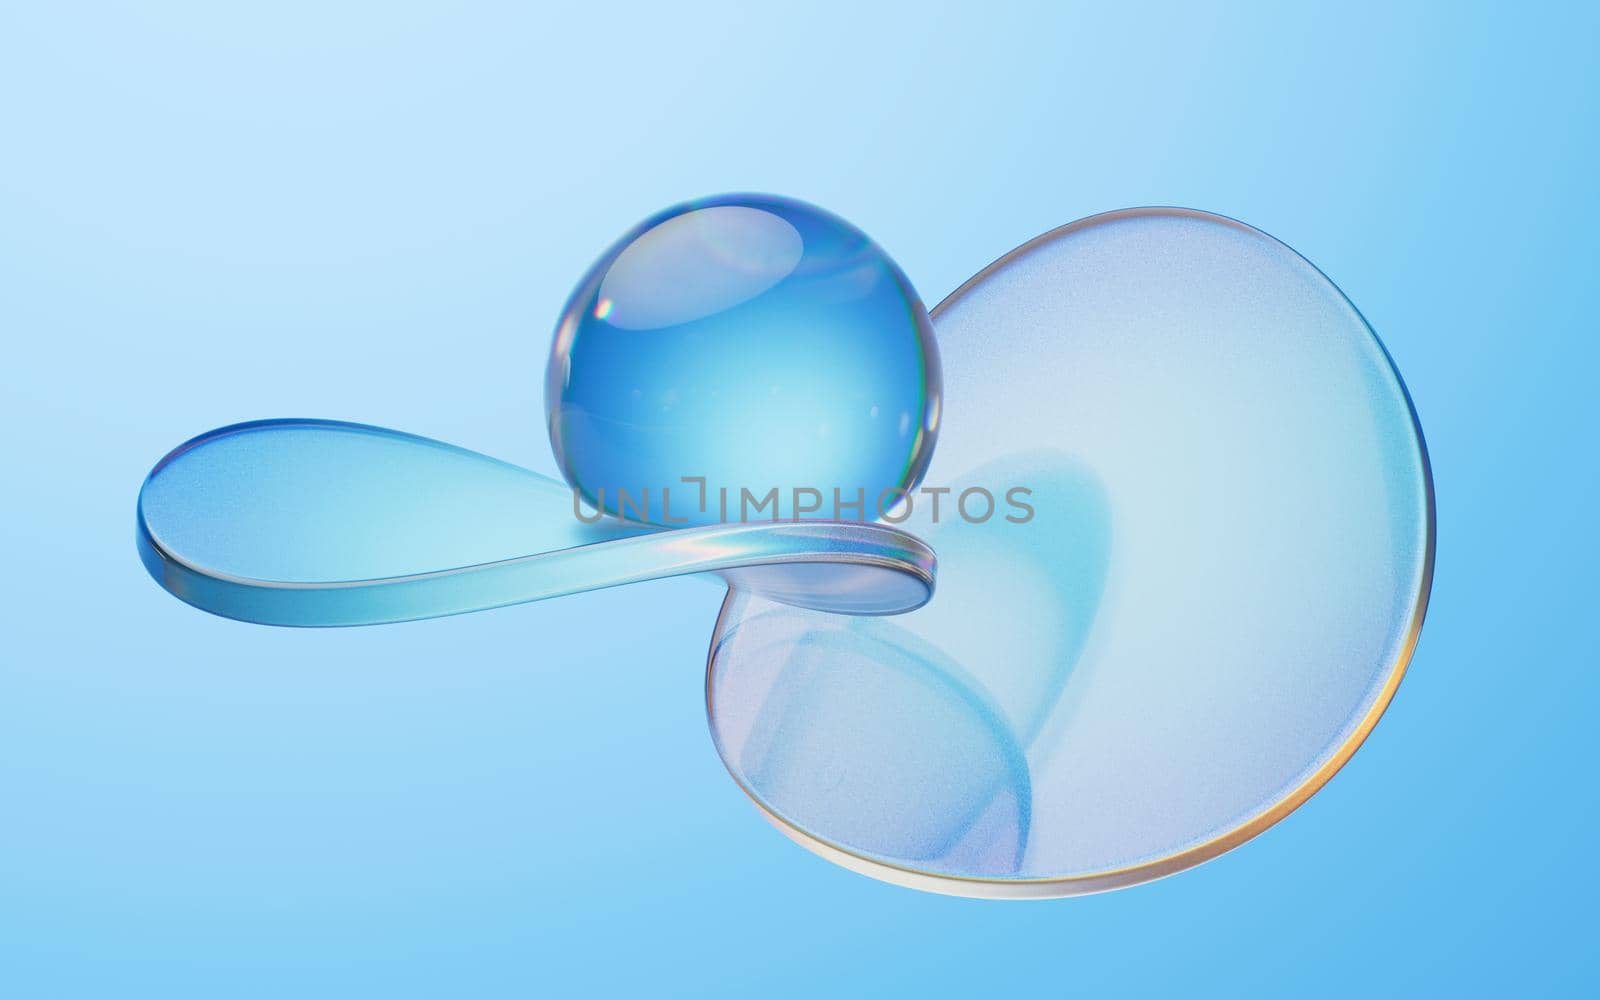 Soft ball and abstract geometric background, 3d rendering. by vinkfan